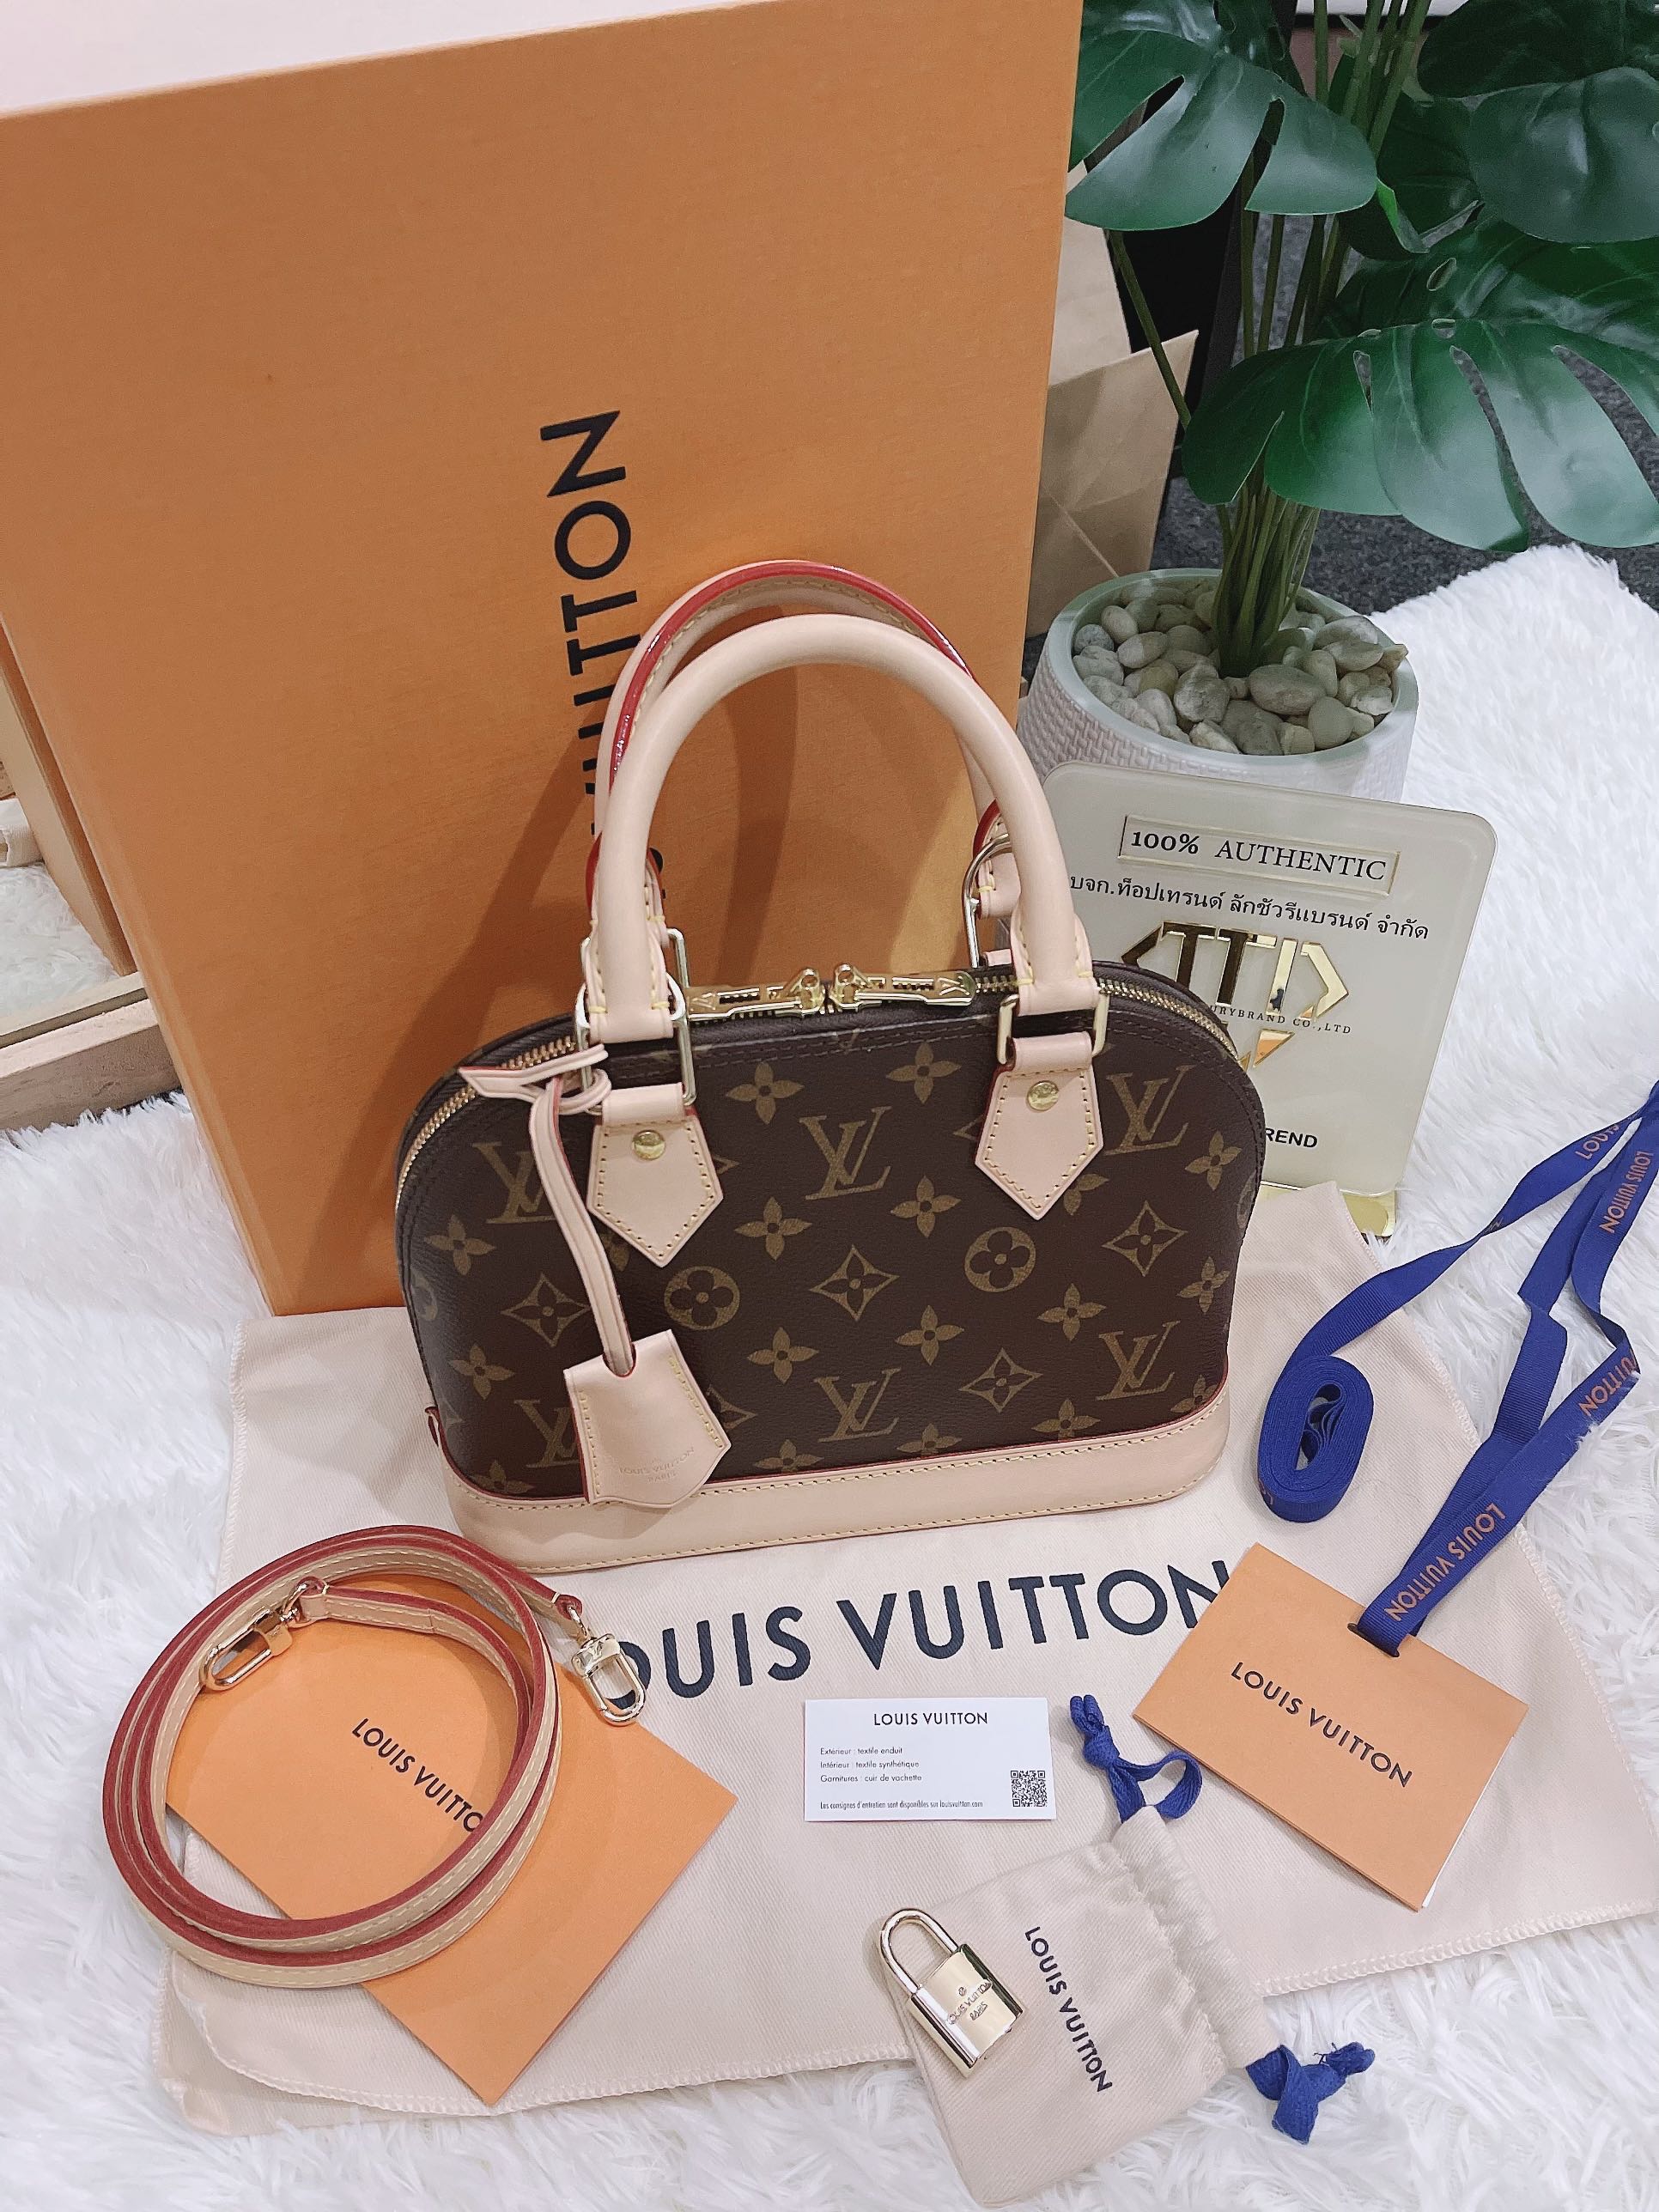 Used in good condition!! Lv alma BB Shop Thai 2022